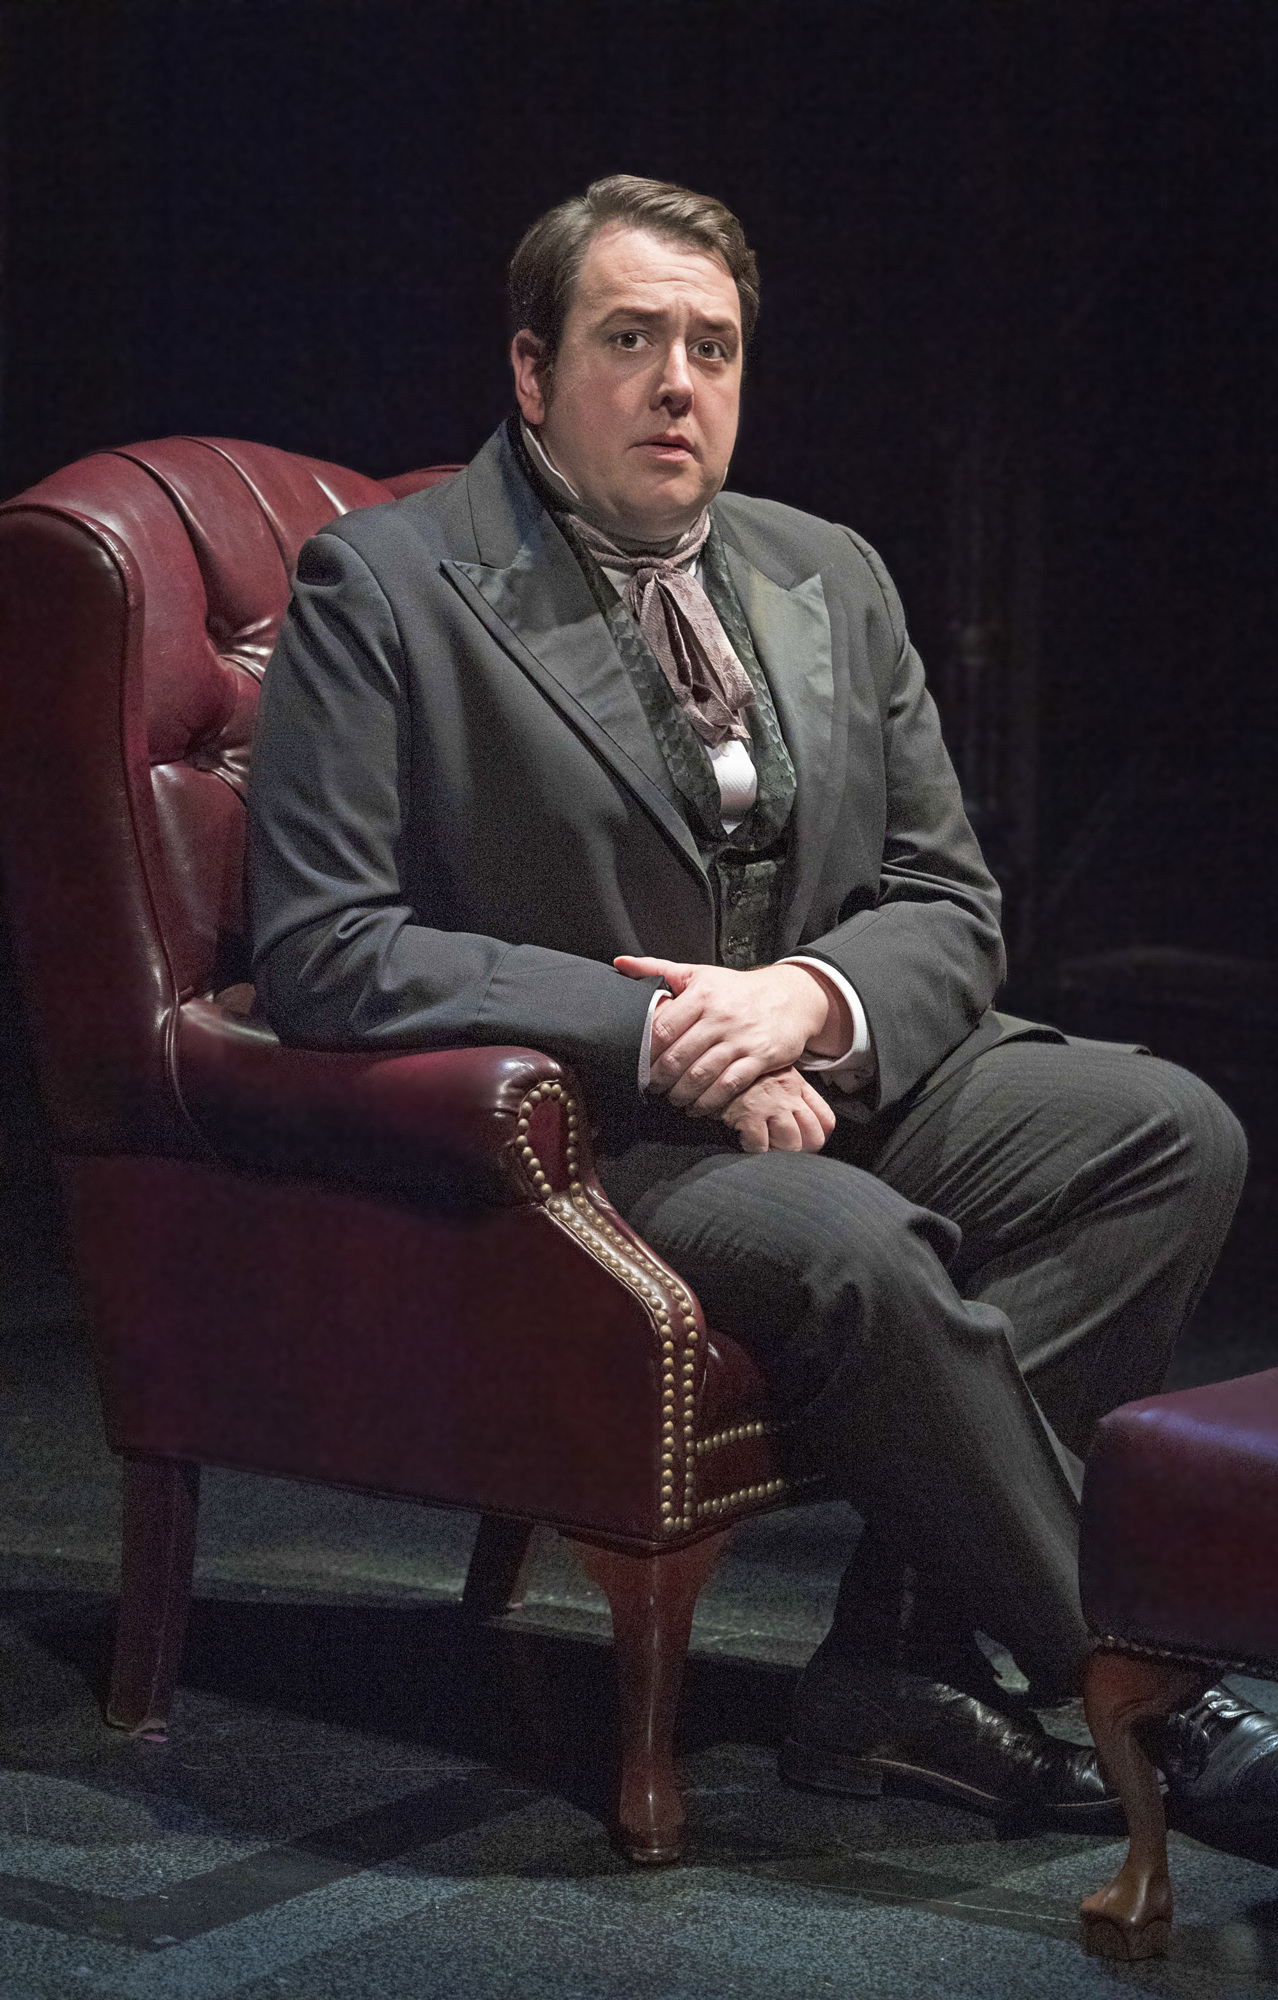 Brian Owen plays ever role other than the governess in “The Turn of the Screw.” Photo by Cliff Roles